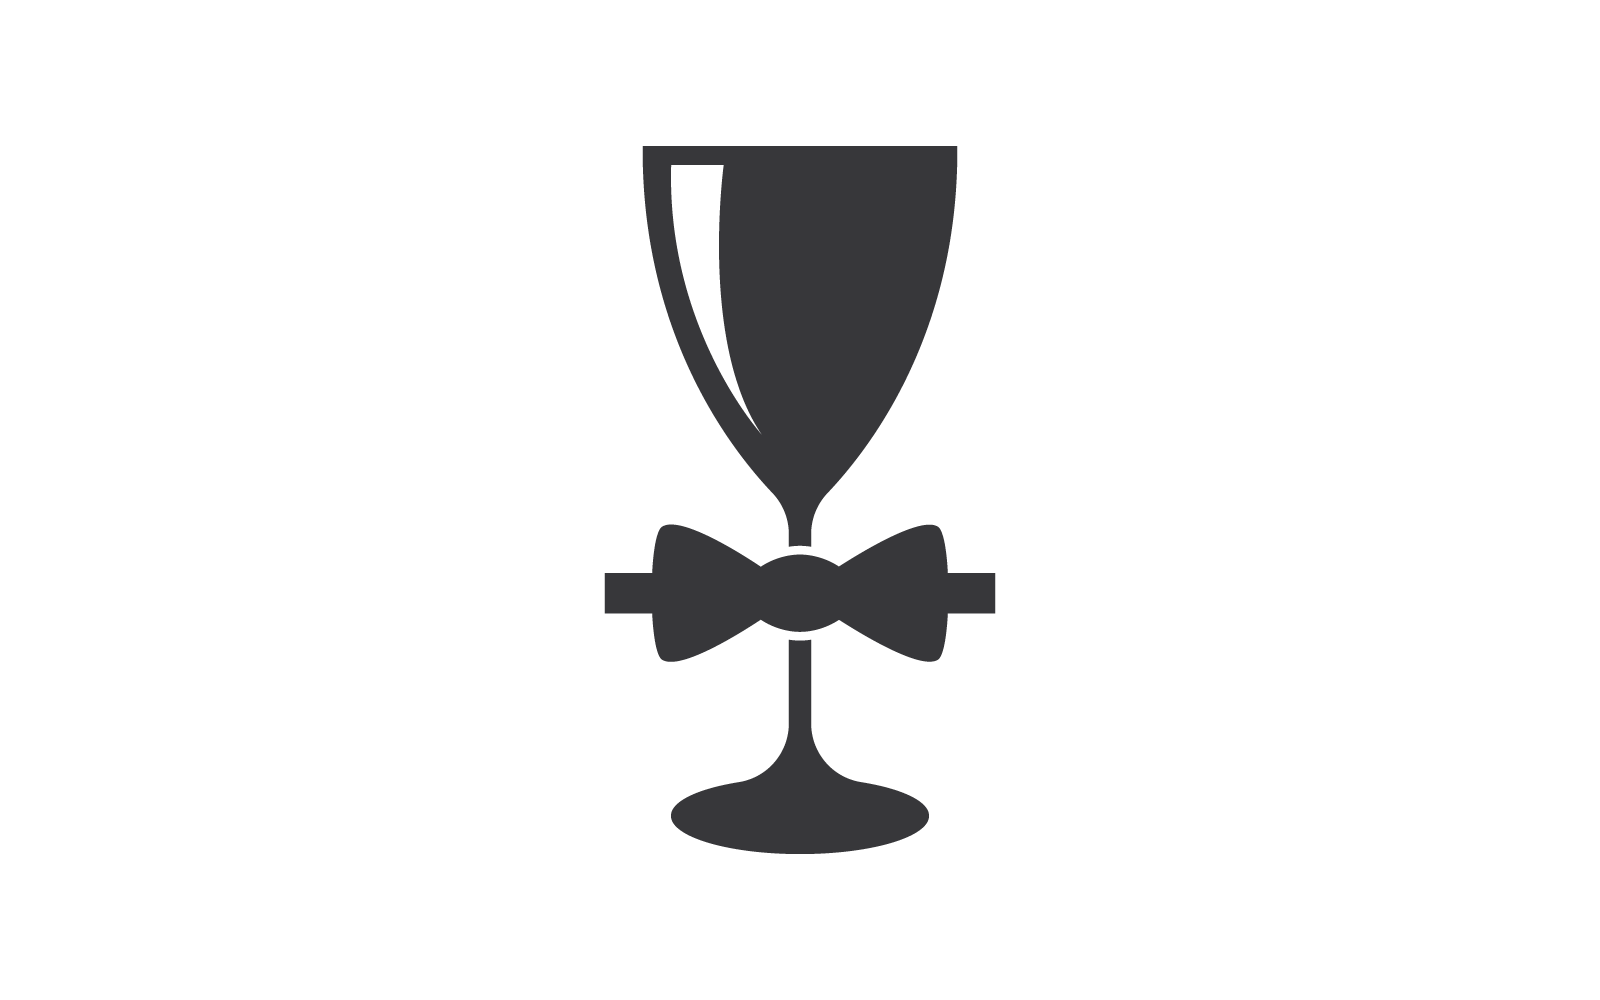 Tie and glass logo illustration vector